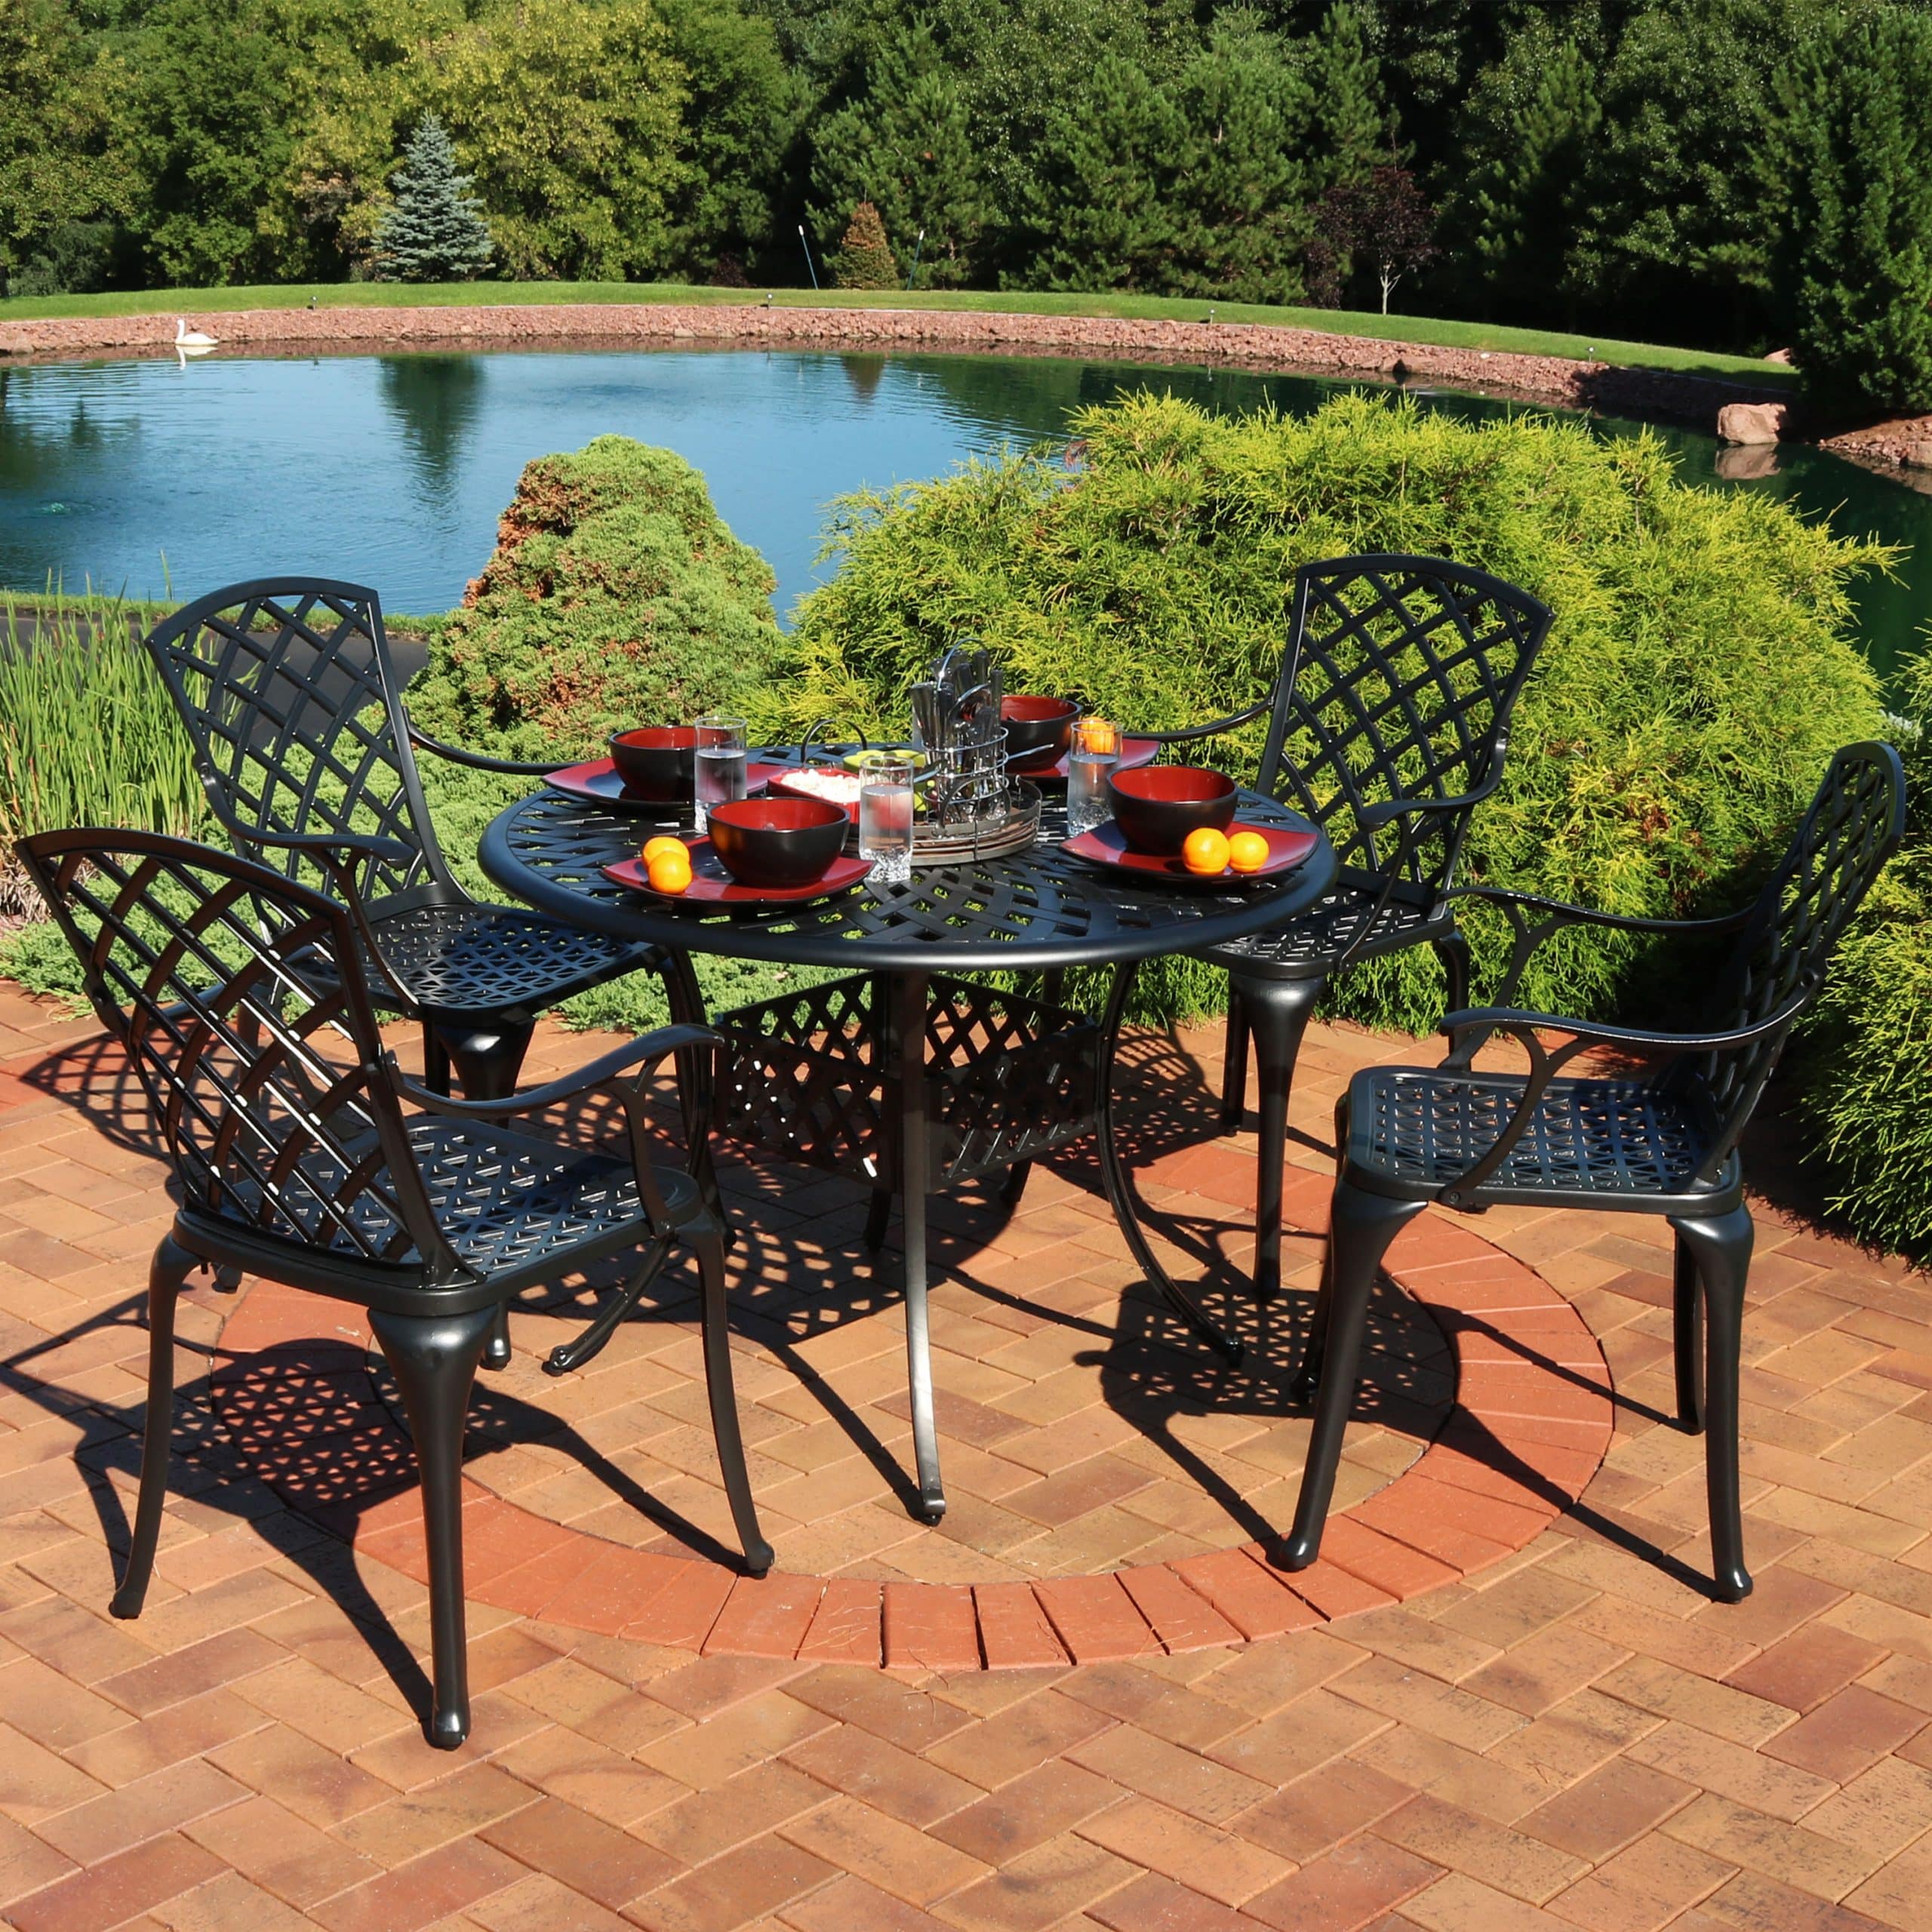 Sunnydaze Outdoor Patio Furniture Dining Set, 4 Metal Chairs and Round ...